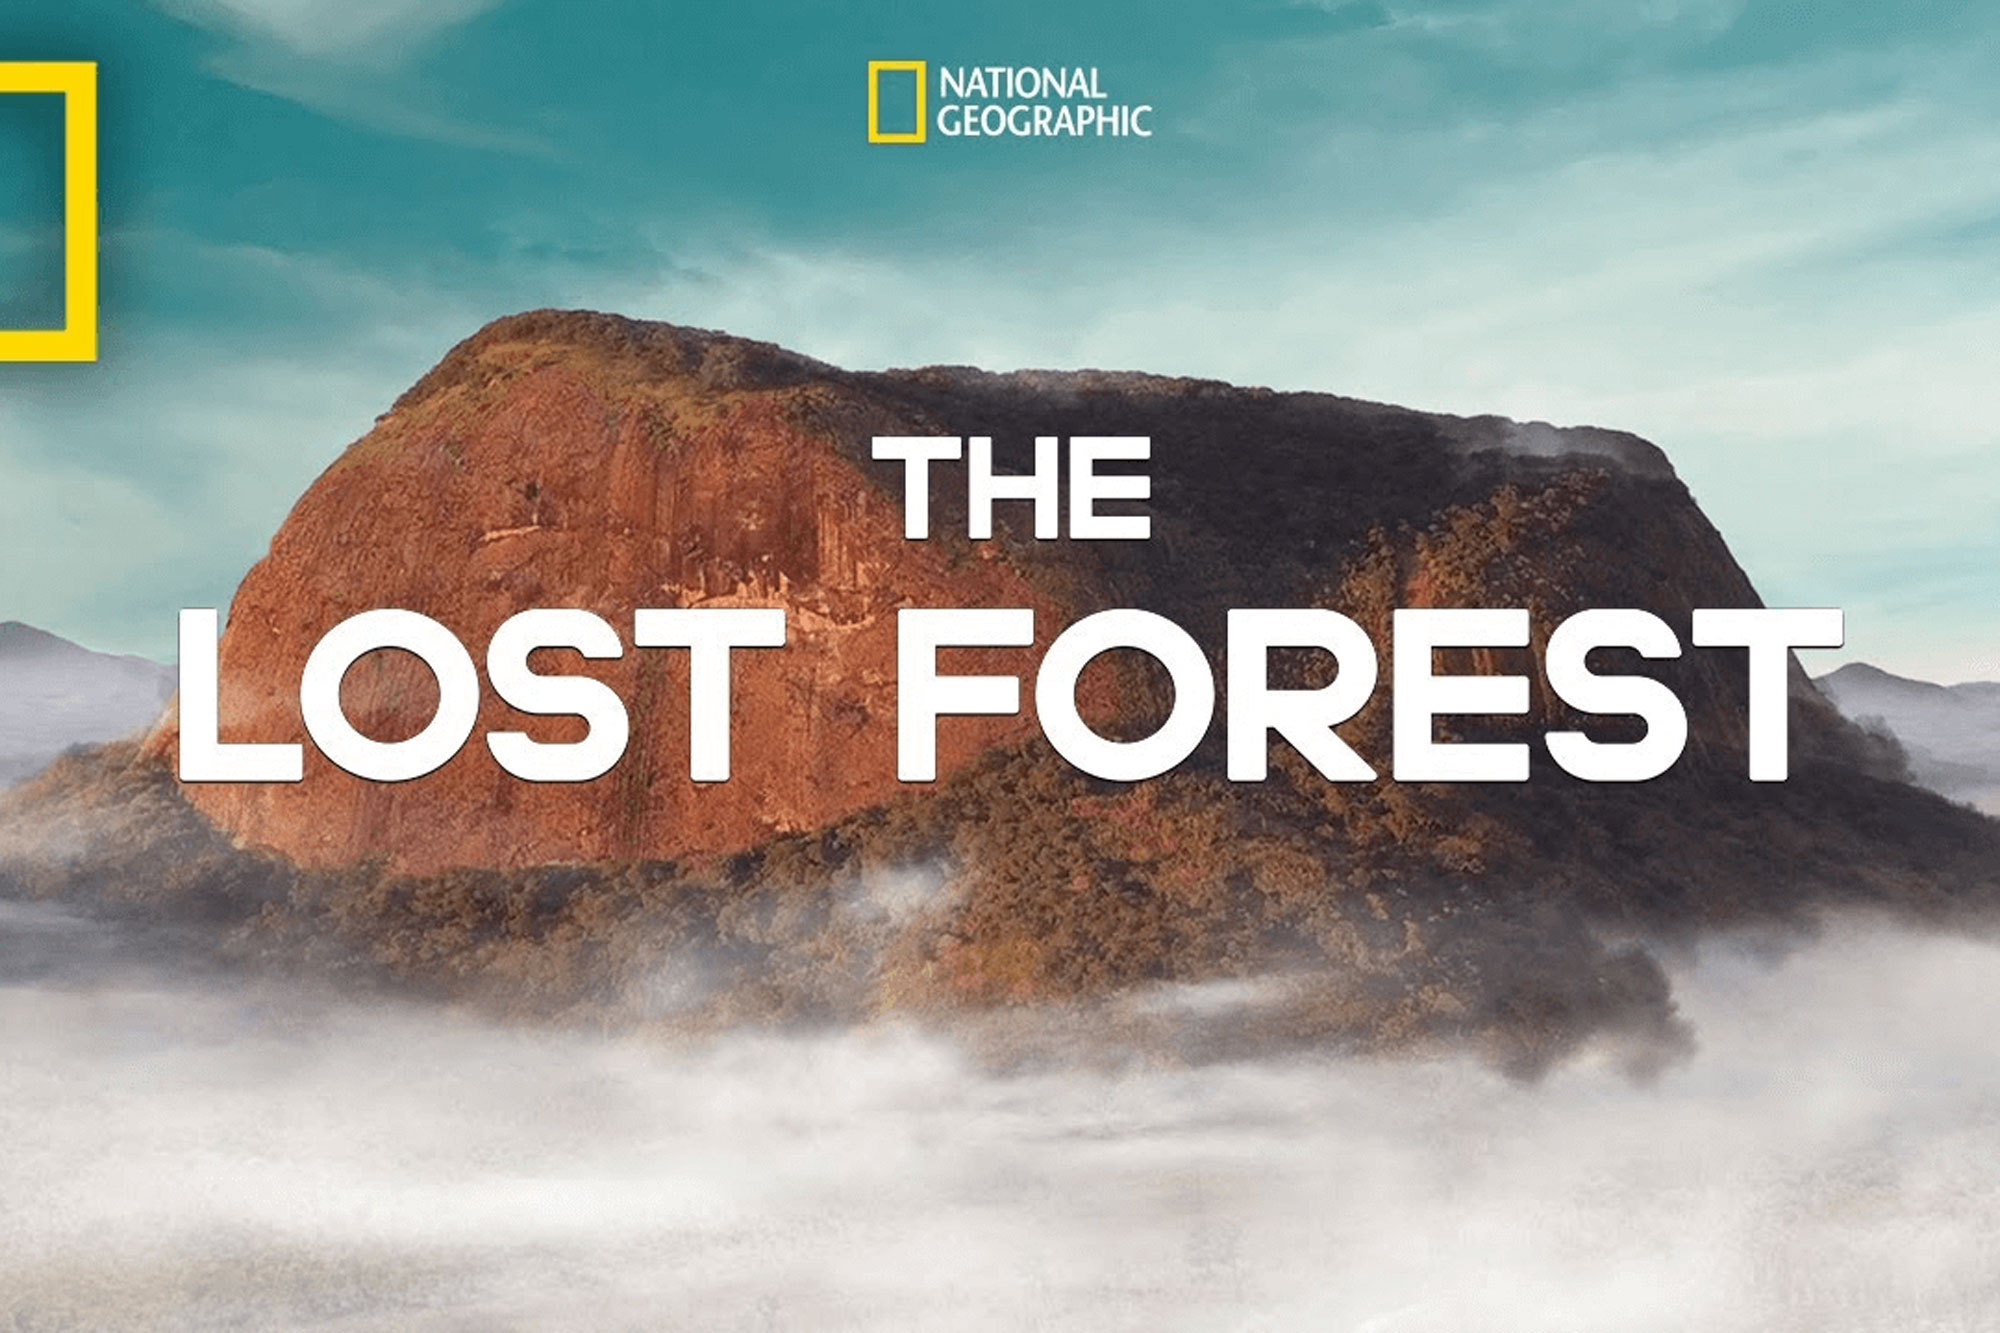 Title card for The Lost Forest, the title overlaid on the image of a cloud-shrouded mount Lico